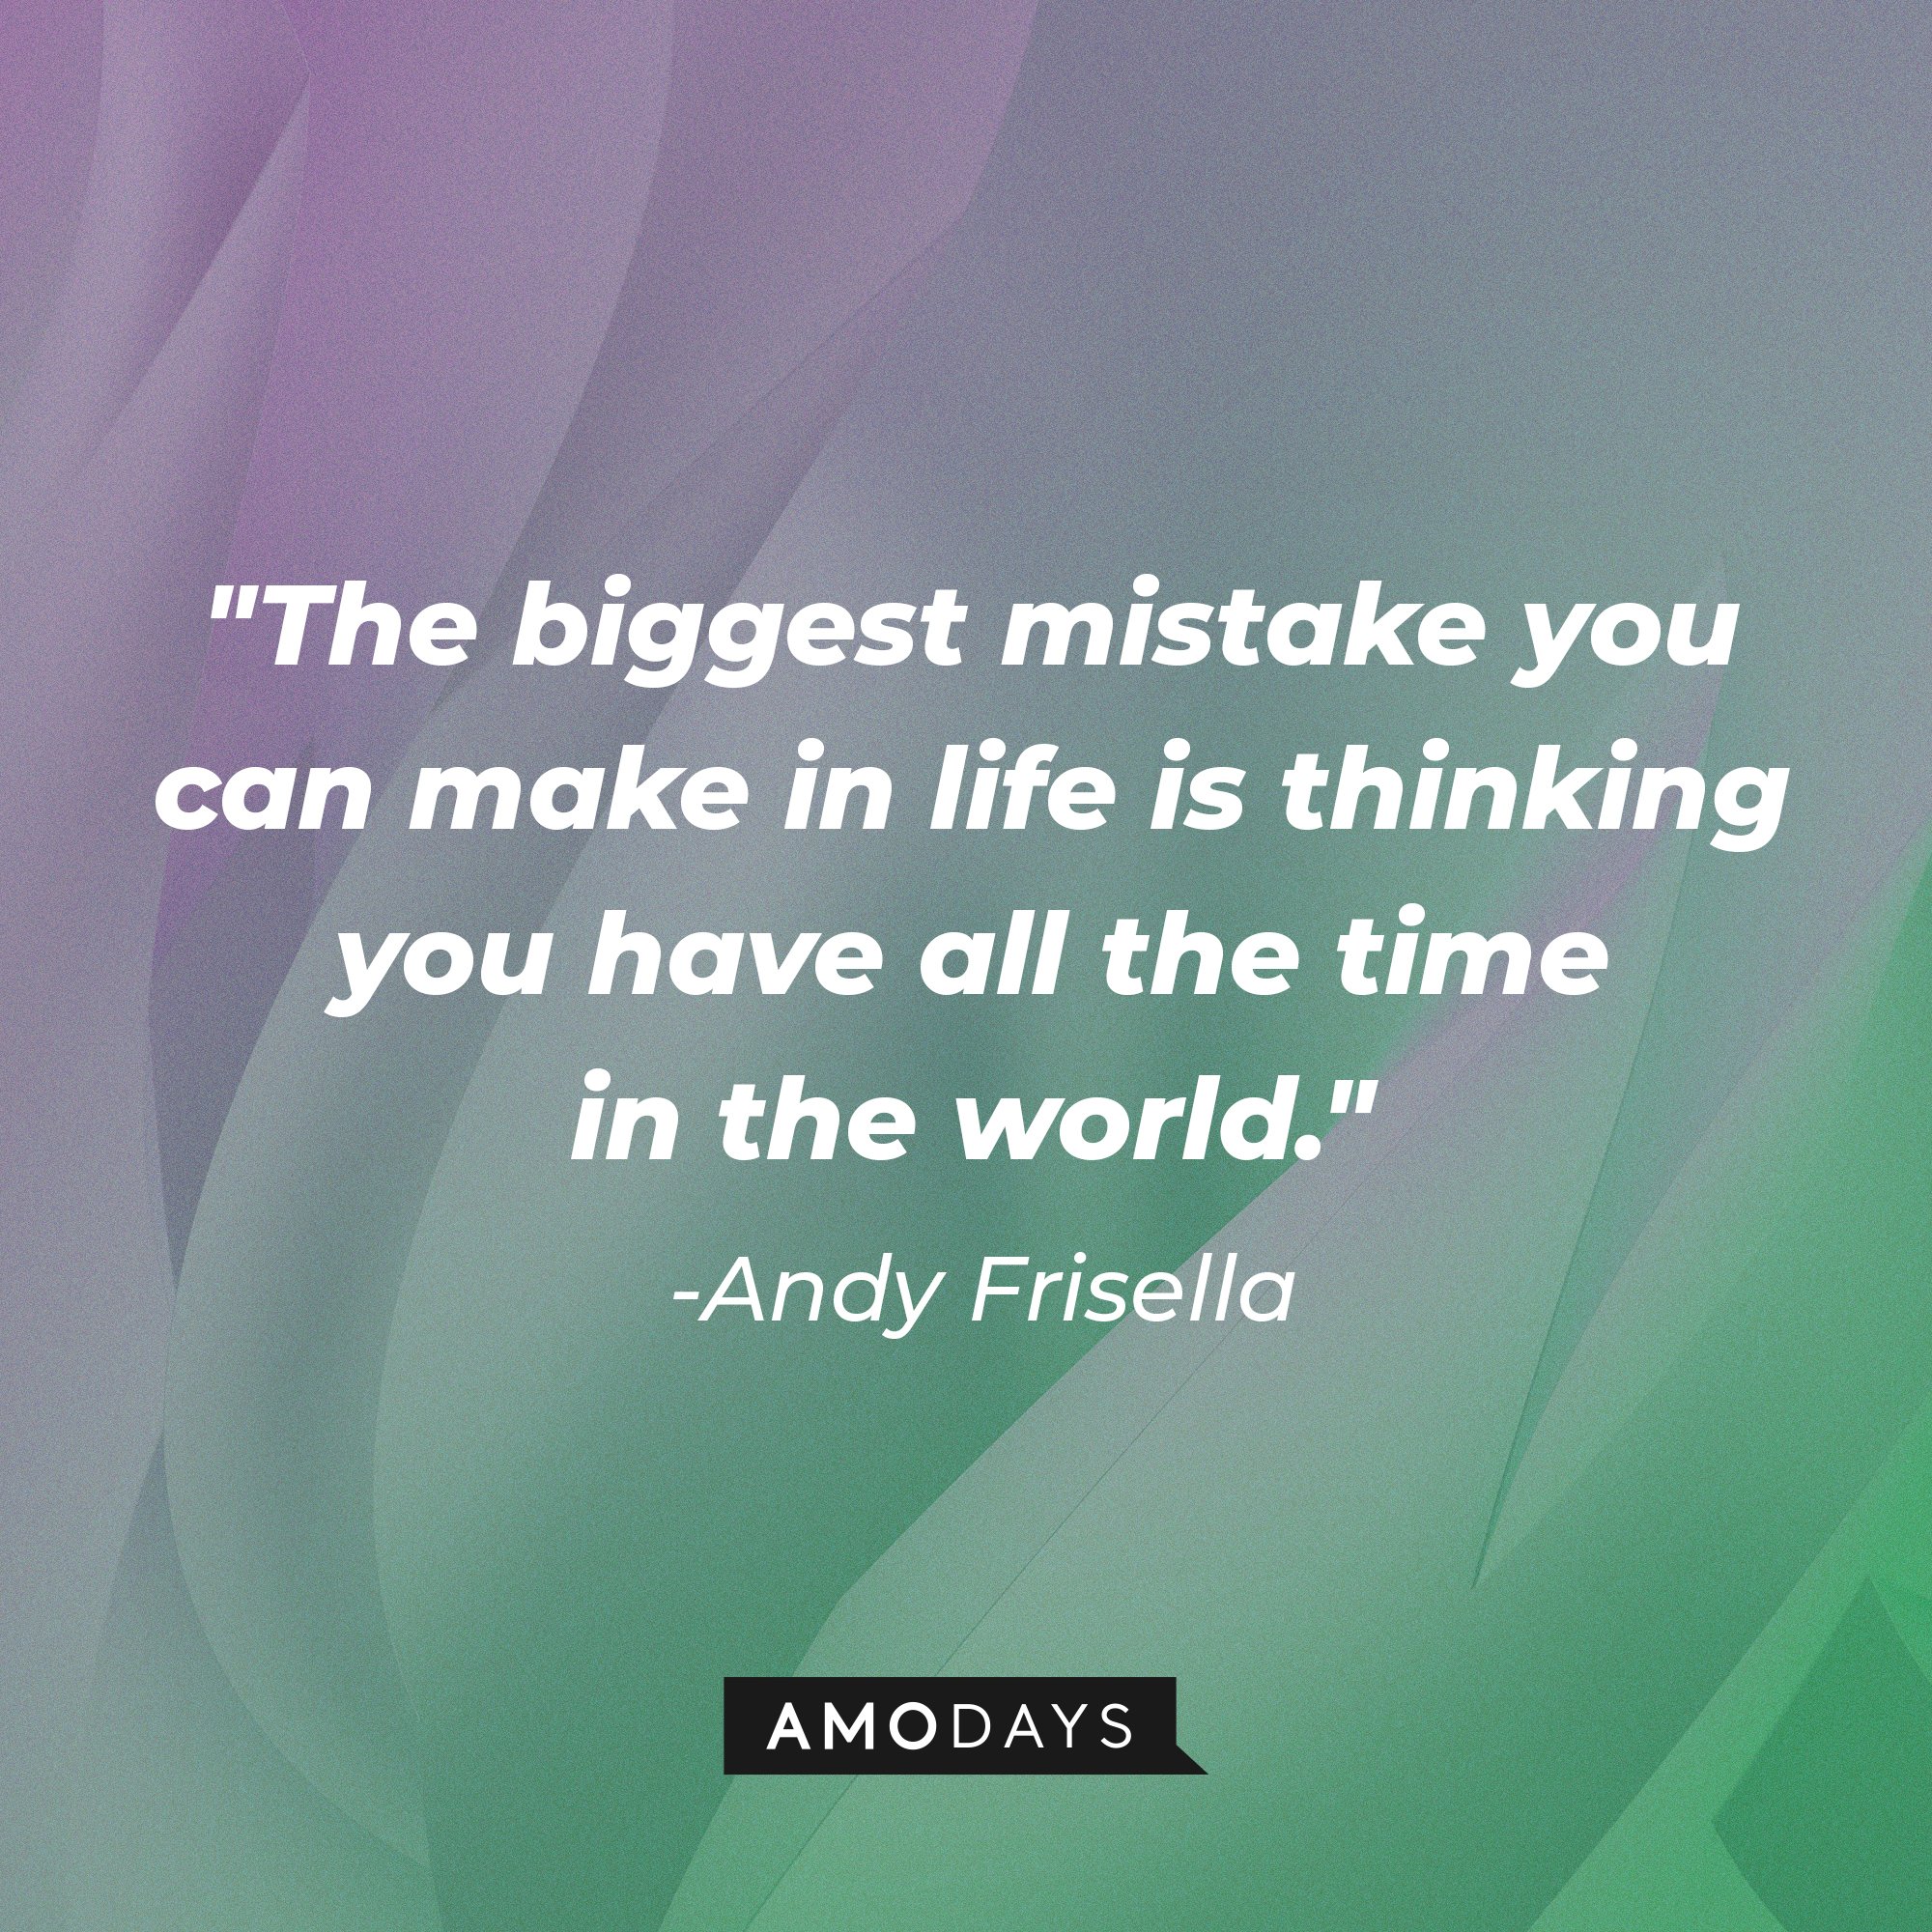 Andy Frisella's quote: "The biggest mistake you can make in life is thinking you have all the time in the world." | Image: AmoDays